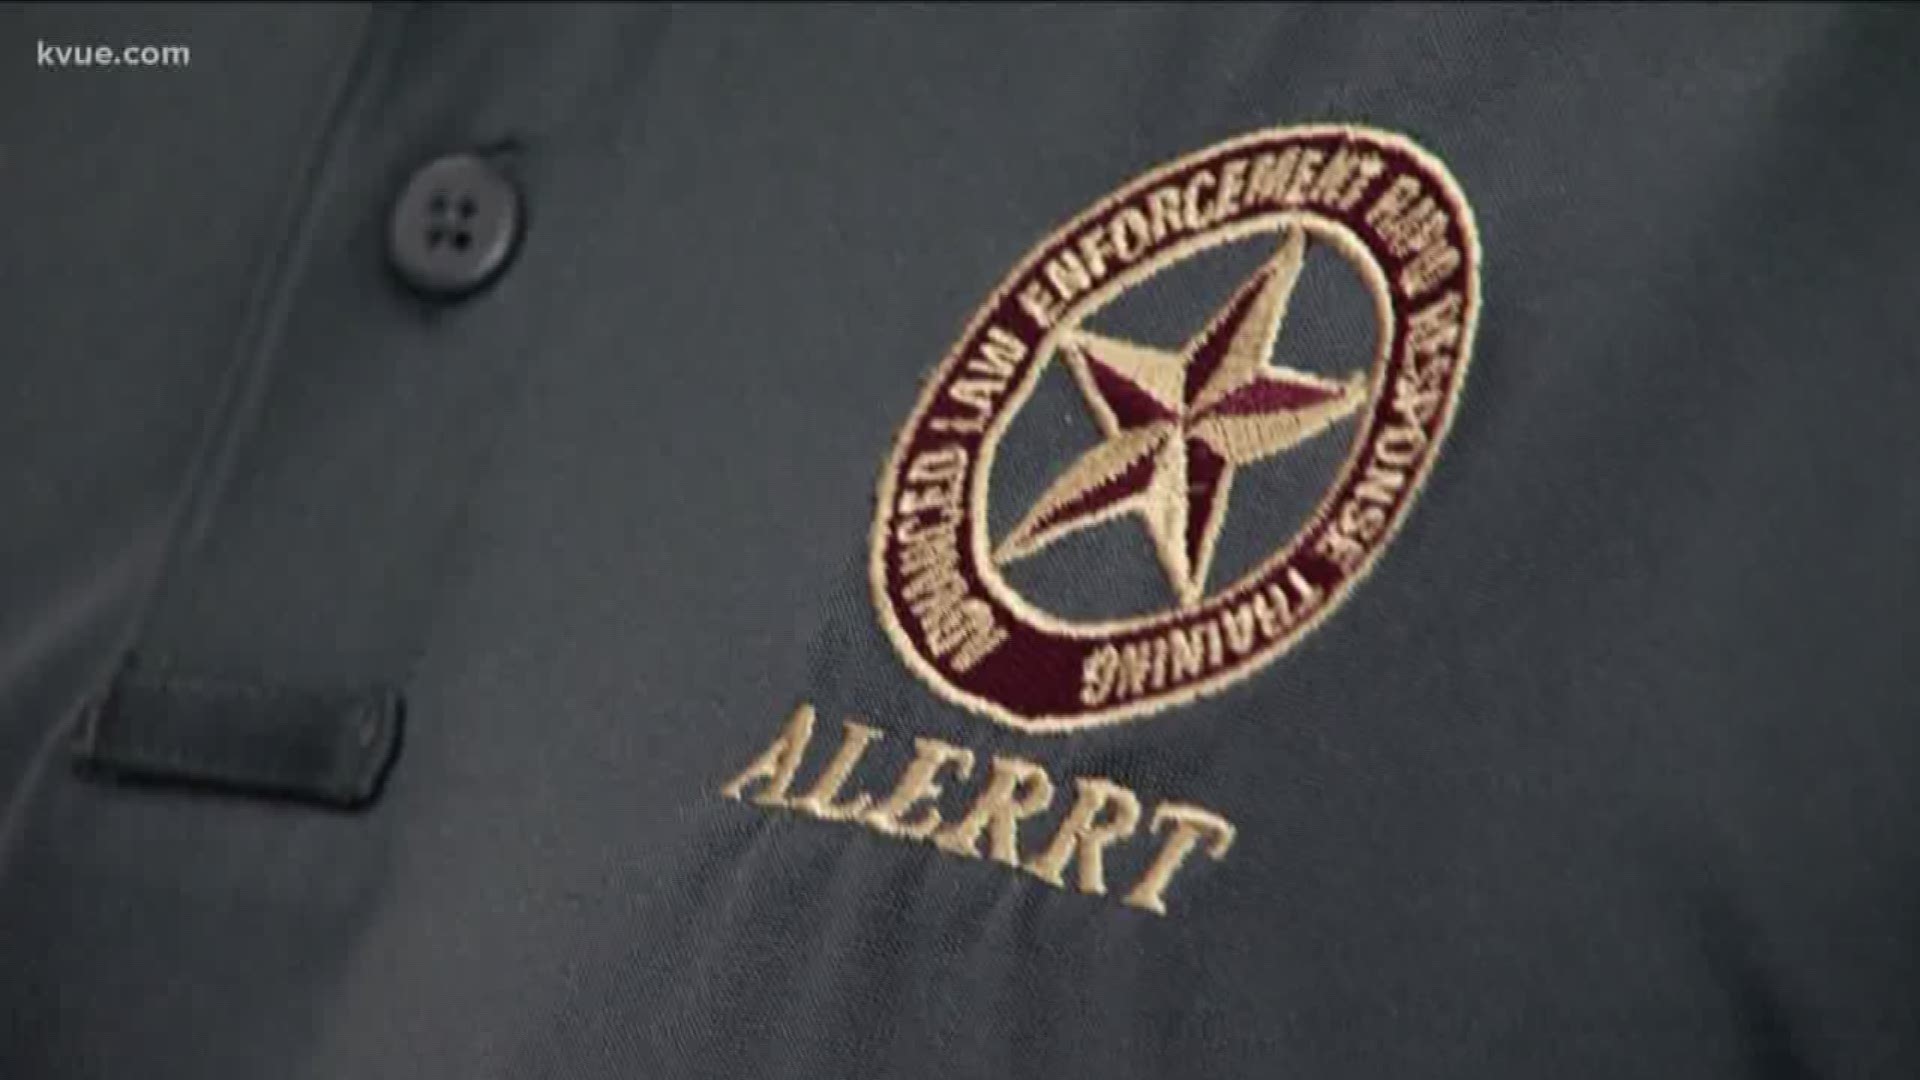 A Central Texas program that helps train first responders for active shooter situations just got $8.7 million to help train more people.